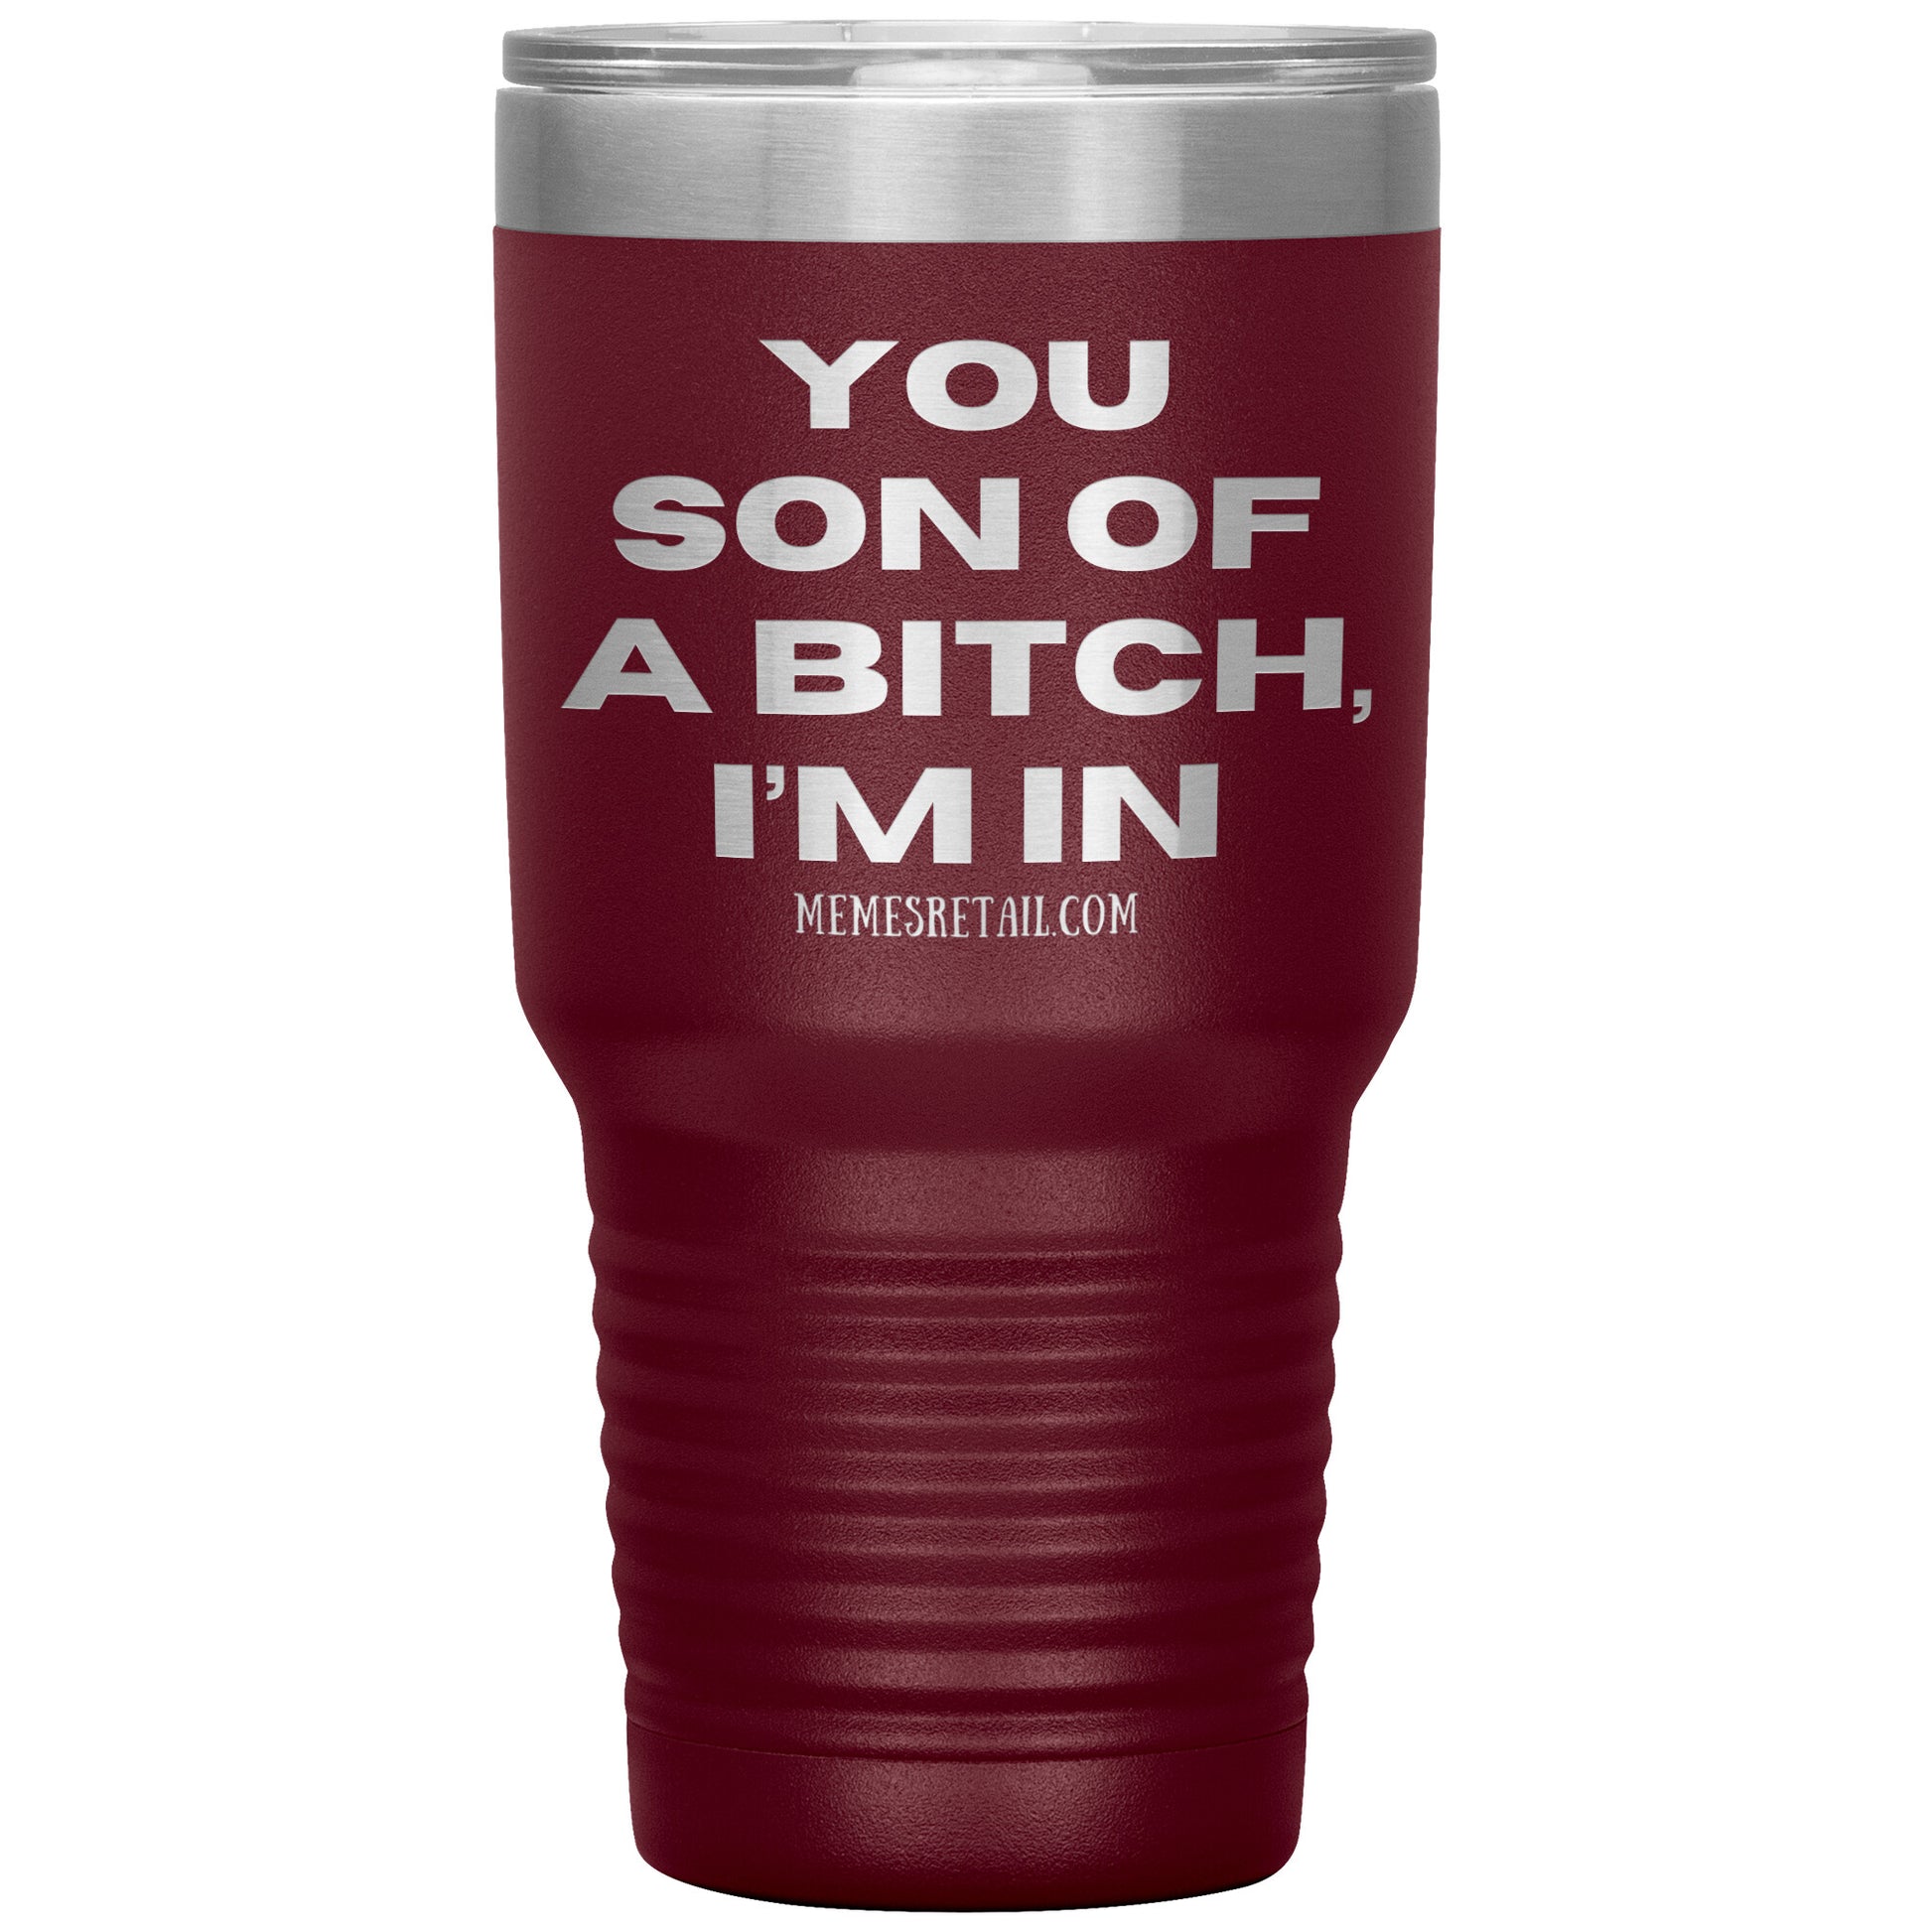 You son of a bitch, I’m in Tumblers, 30oz Insulated Tumbler / Maroon - MemesRetail.com